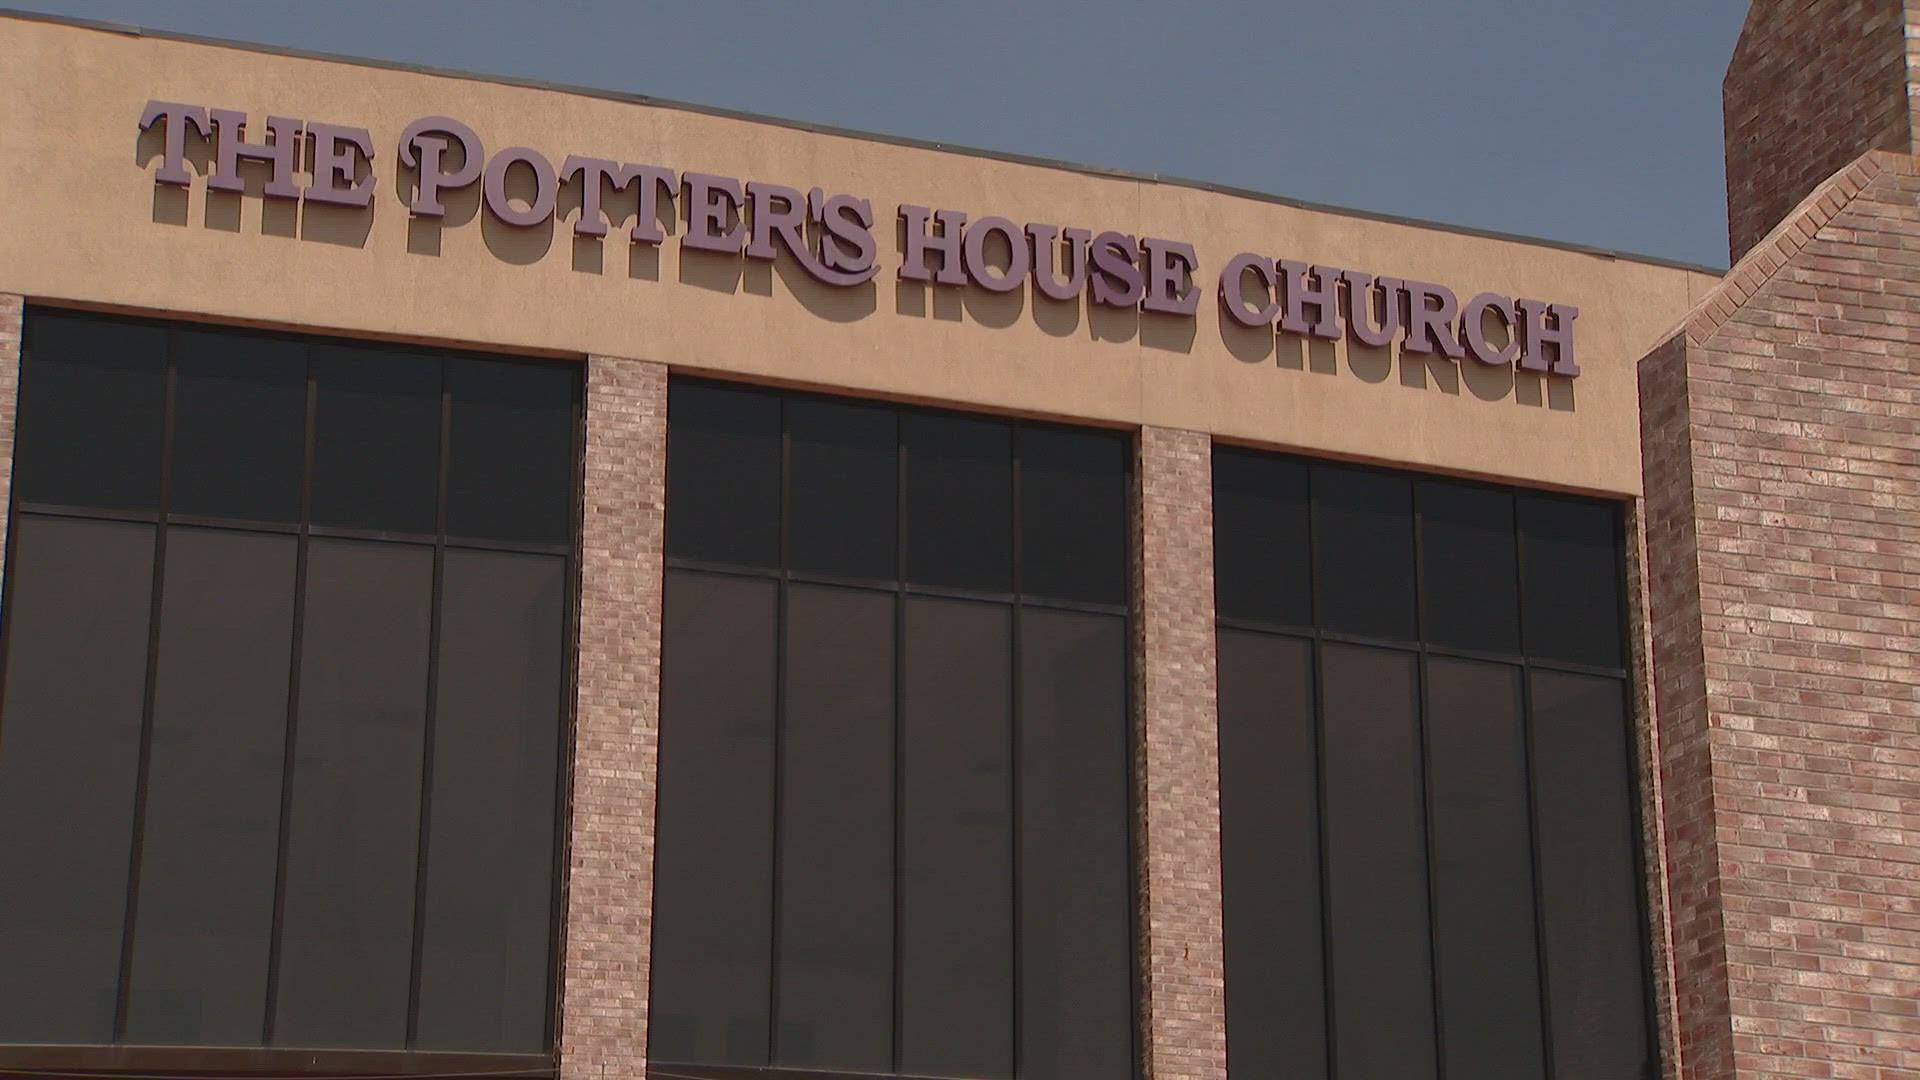 The Potter's House Church is located at 9495 E. Florida Ave.